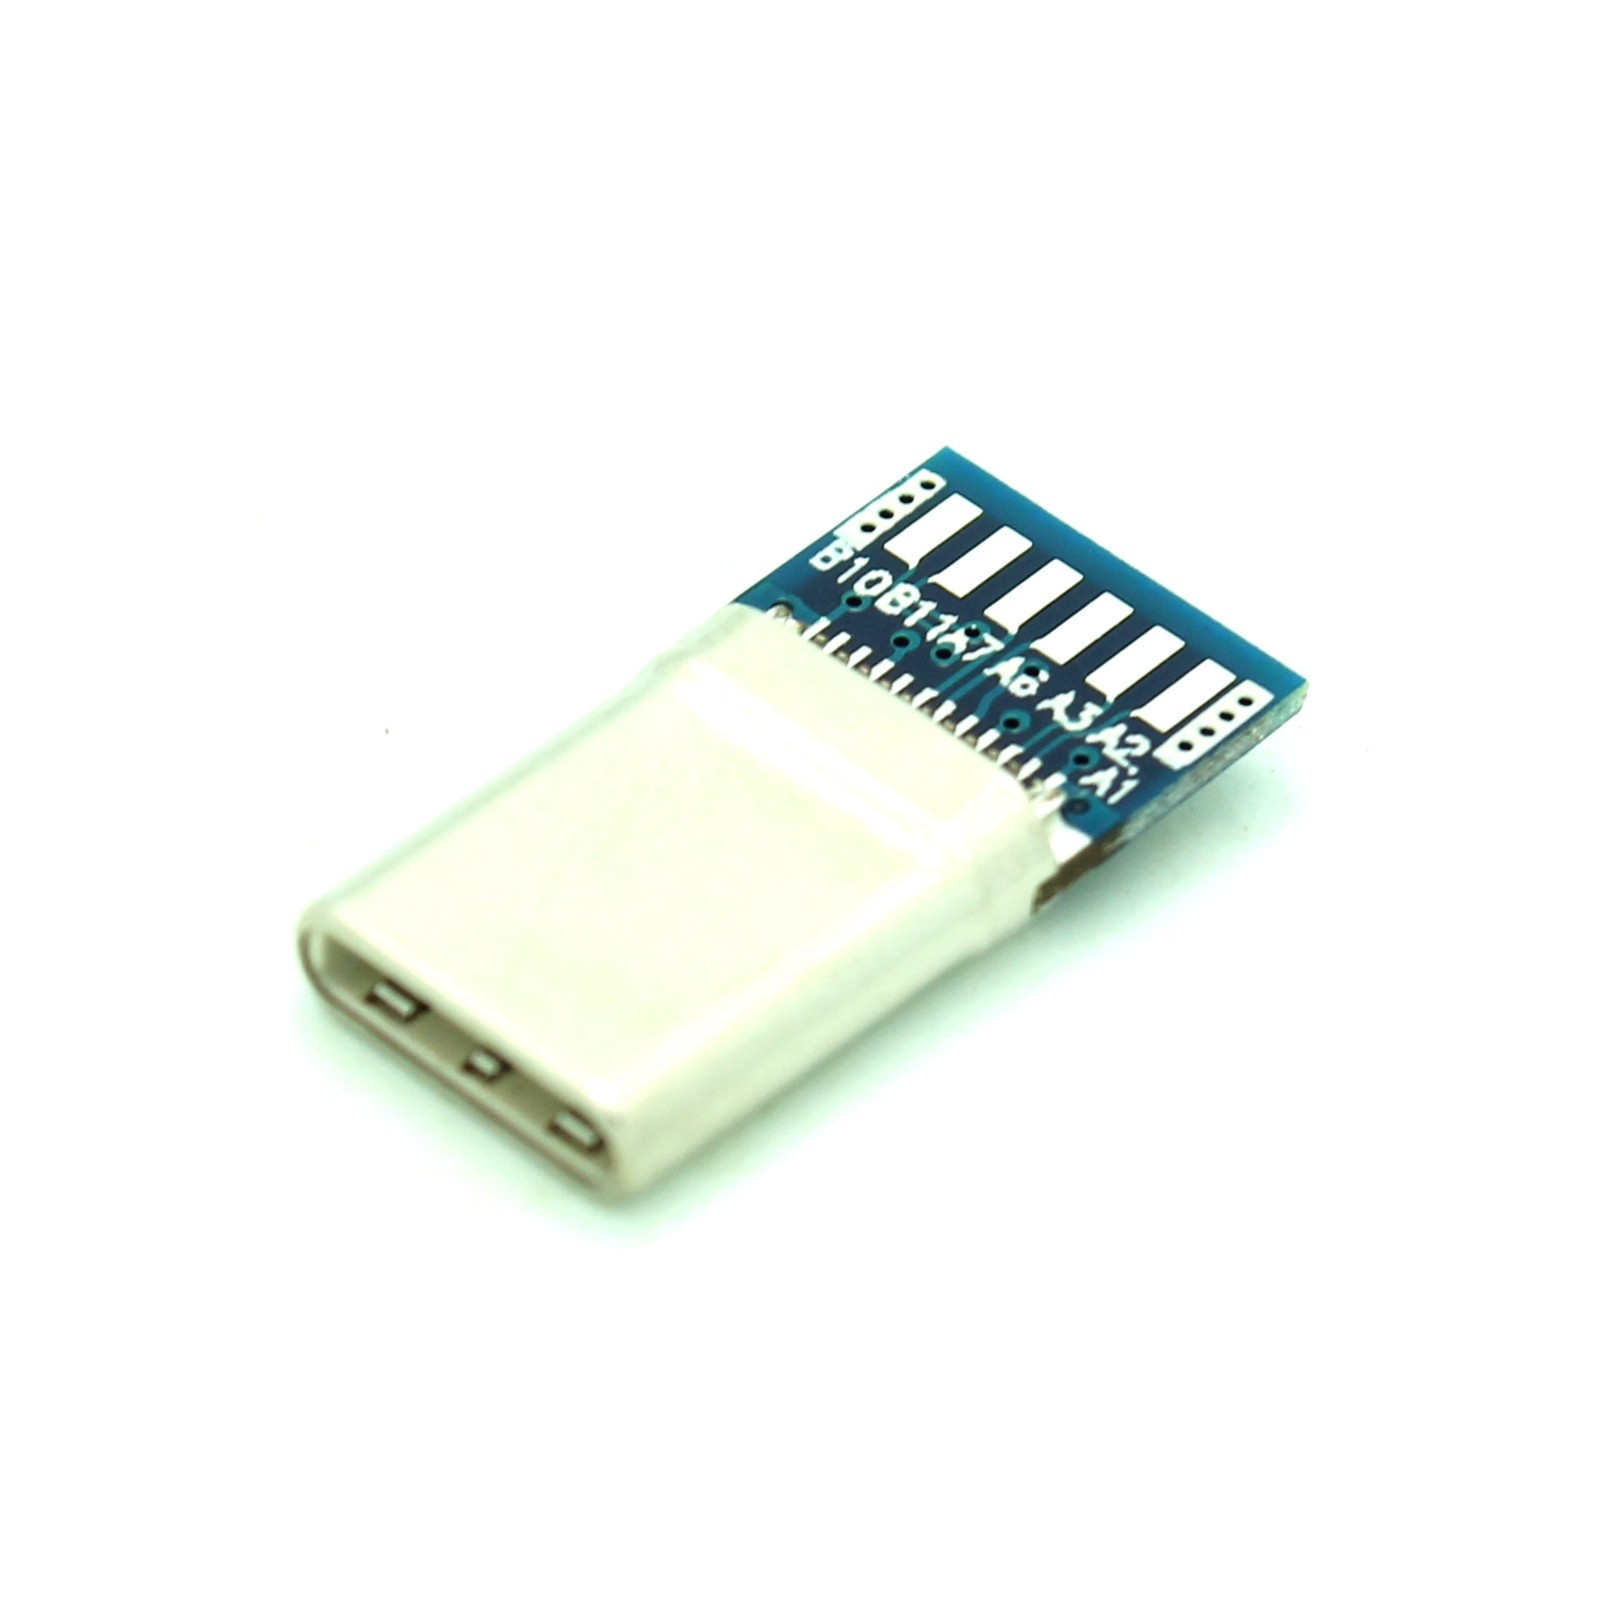 10 Pieces USB Type B Female Socket Breakout Board to DIP Printer Accessory